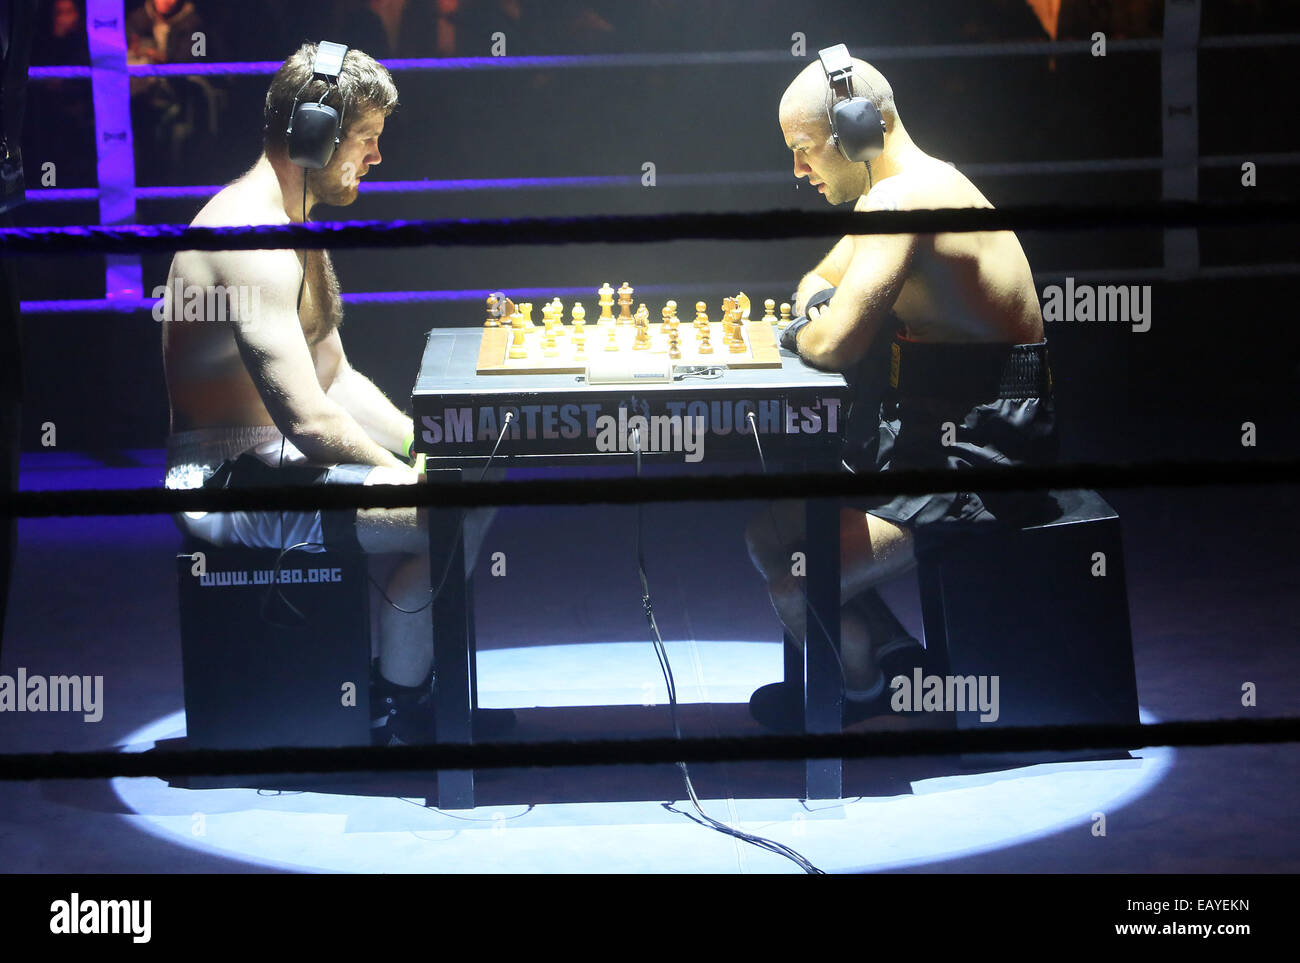 Chess boxers Arik Braun (R) and Felix Bartels sit in front of a chequer  board during the Chess Boxing Championships in Berlin, Germany, 28 July  2012. The chess boxing event took place